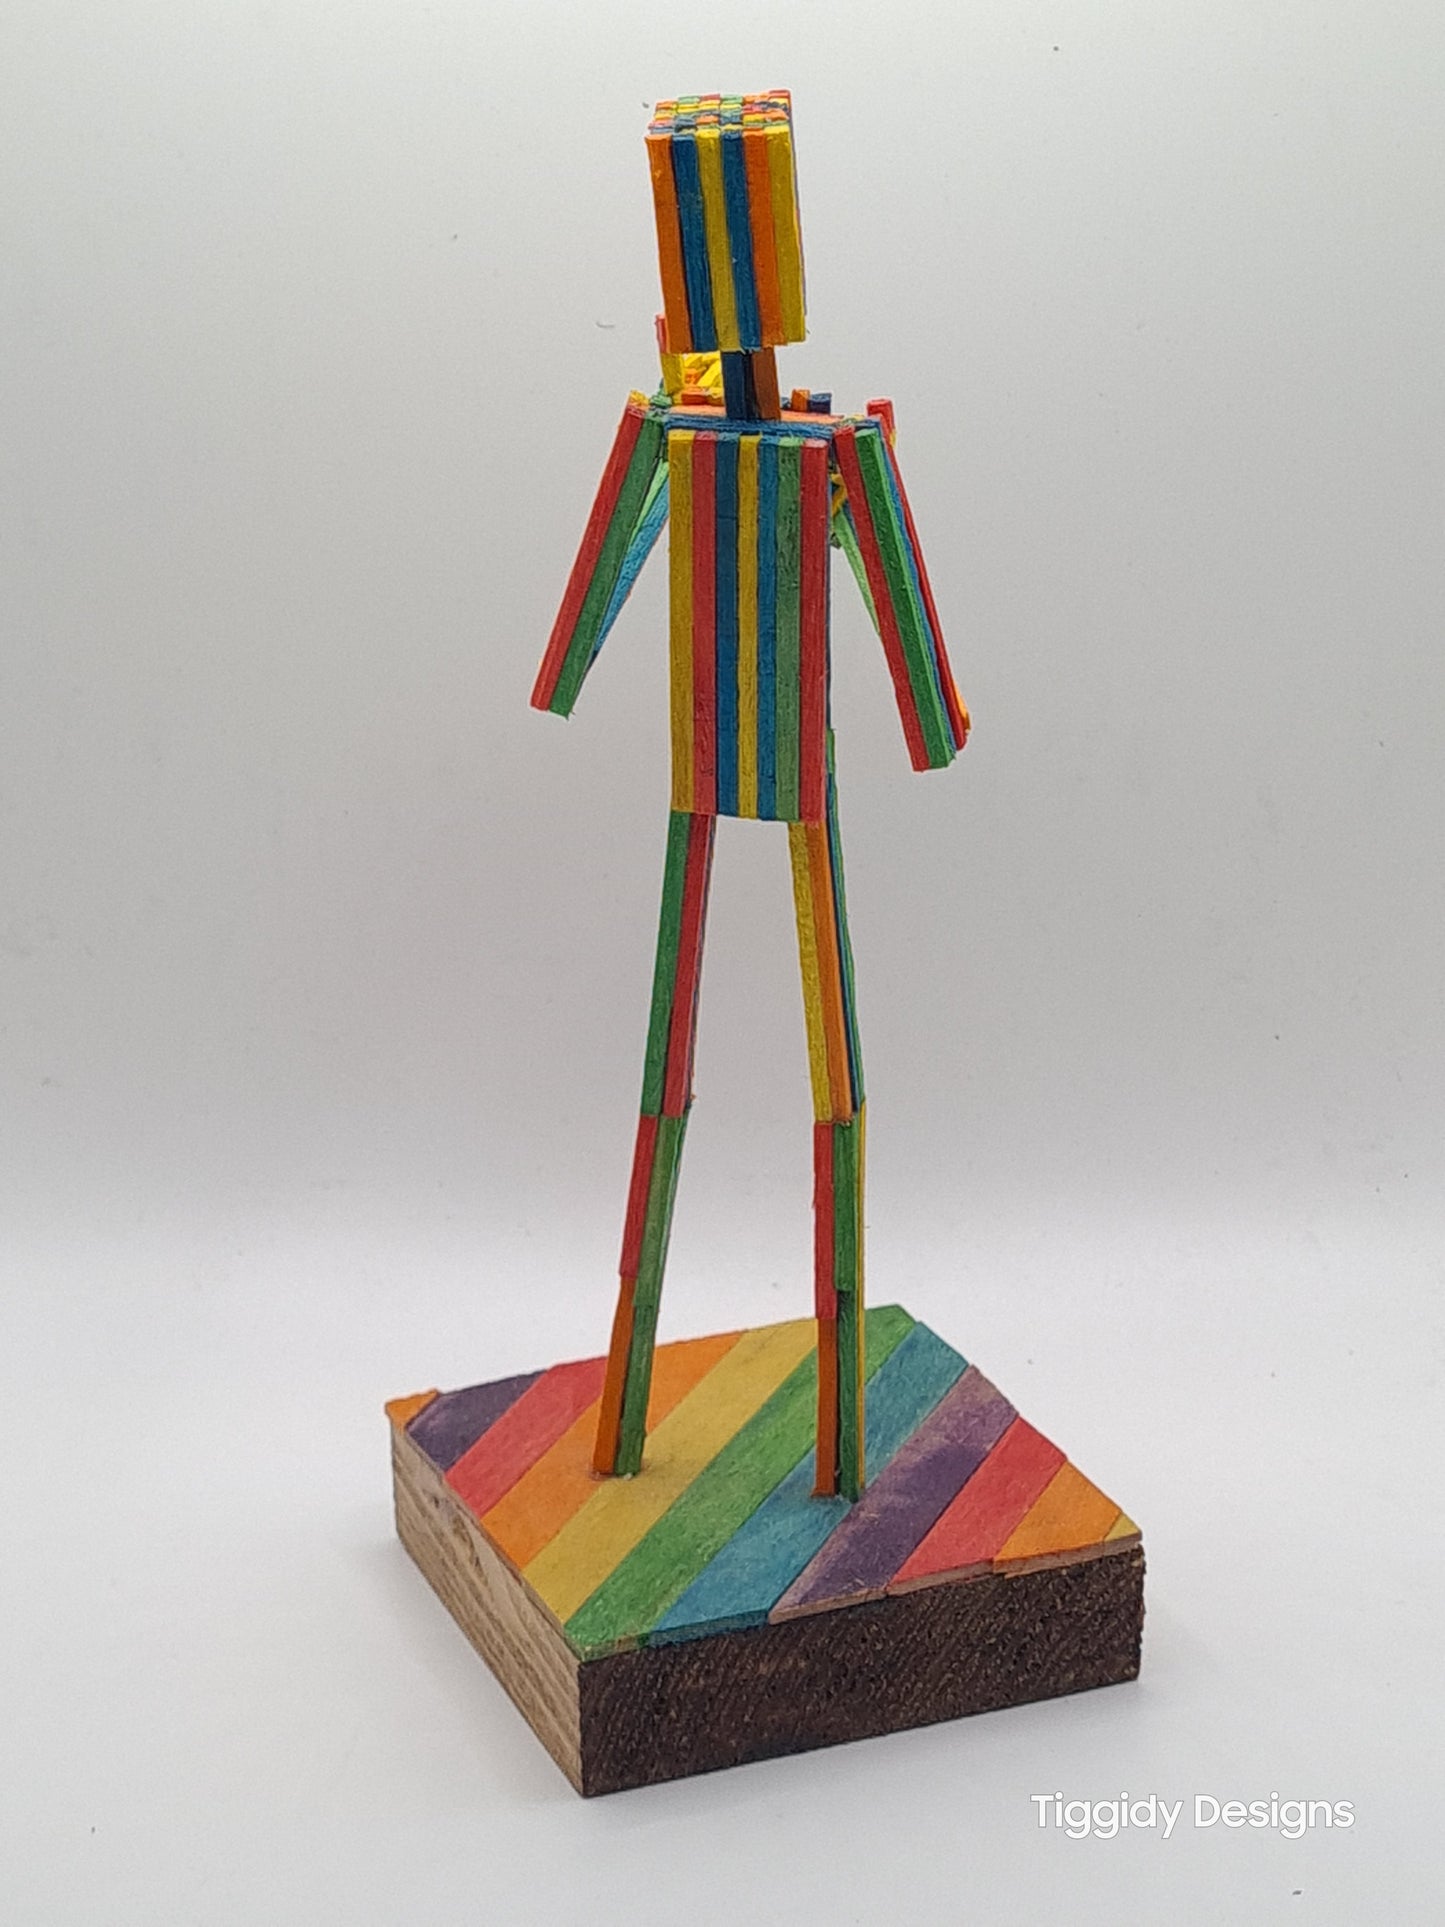 Rainbow Thumbs Up - Handcrafted Wooden Matchstick Figures - Gifts, Ornaments and Decor By Tiggidy Designs